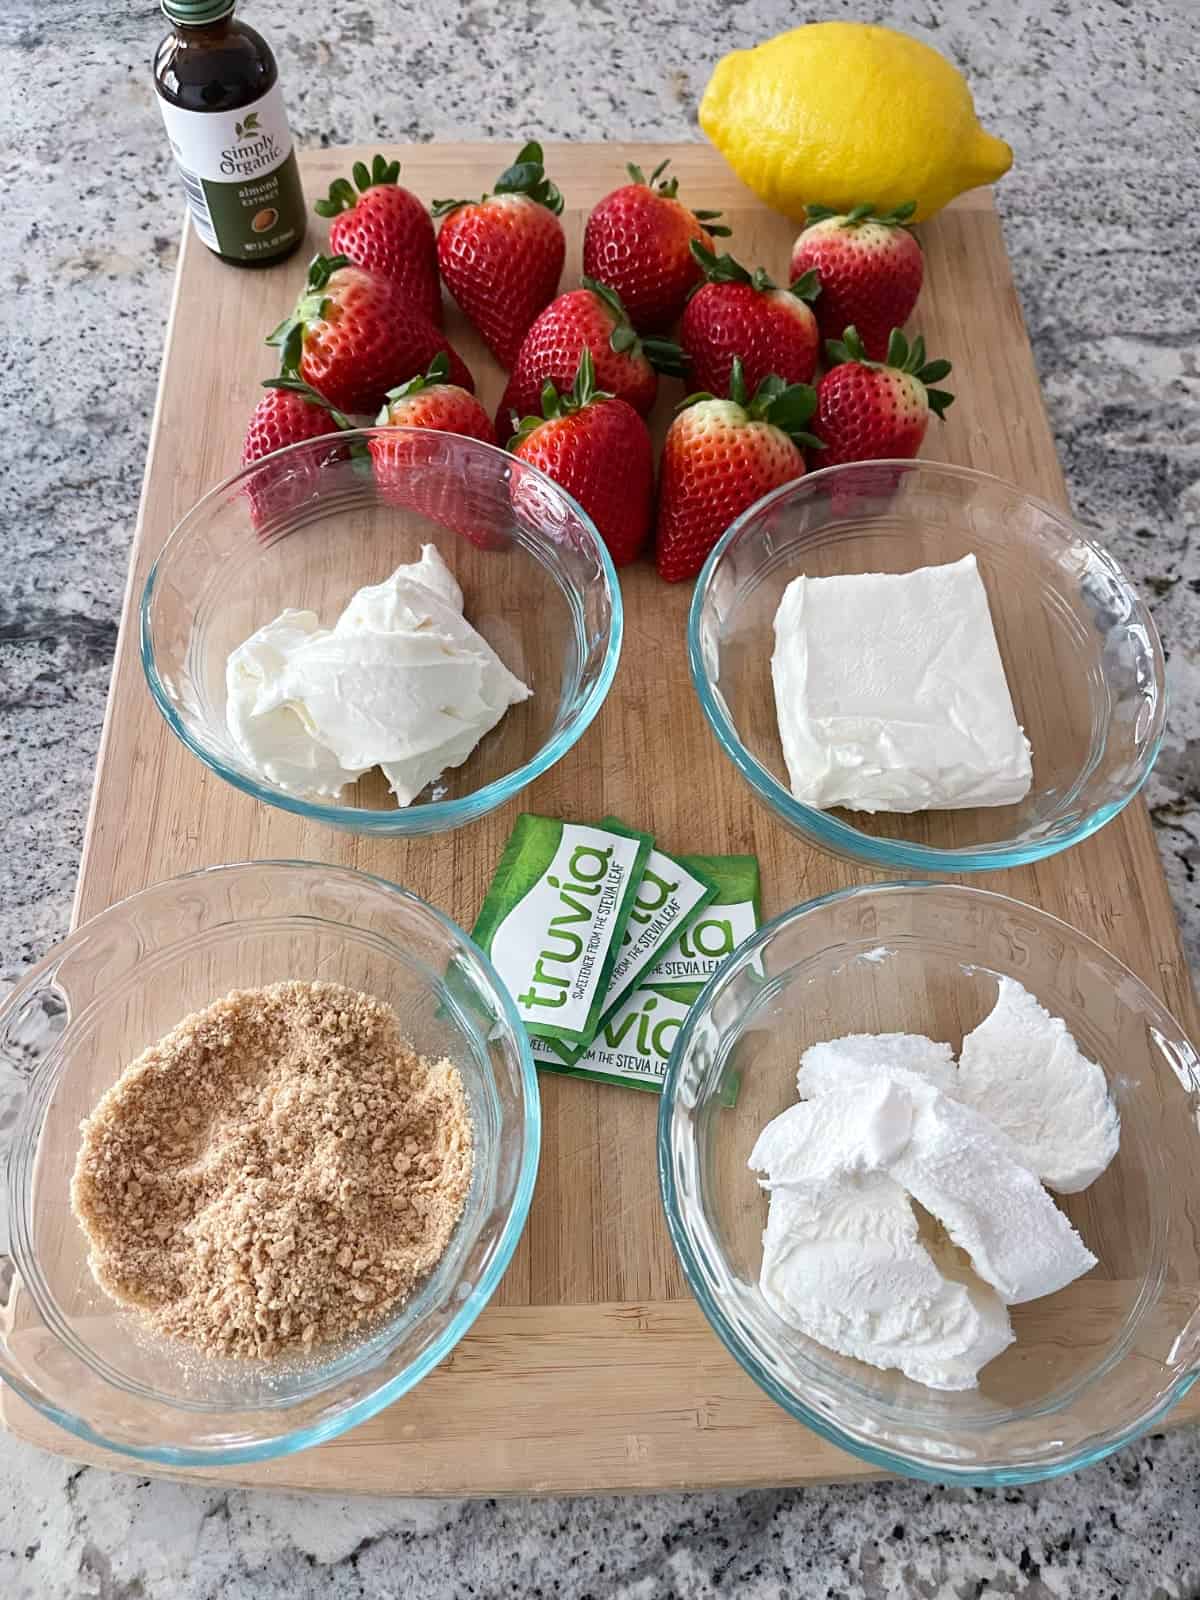 Fresh strawberries, almond extract, whole lemon, Truvia sweetener packets, graham cracker crumbs, light cream cheese and lightly whipped topping on a wooden cutting board.